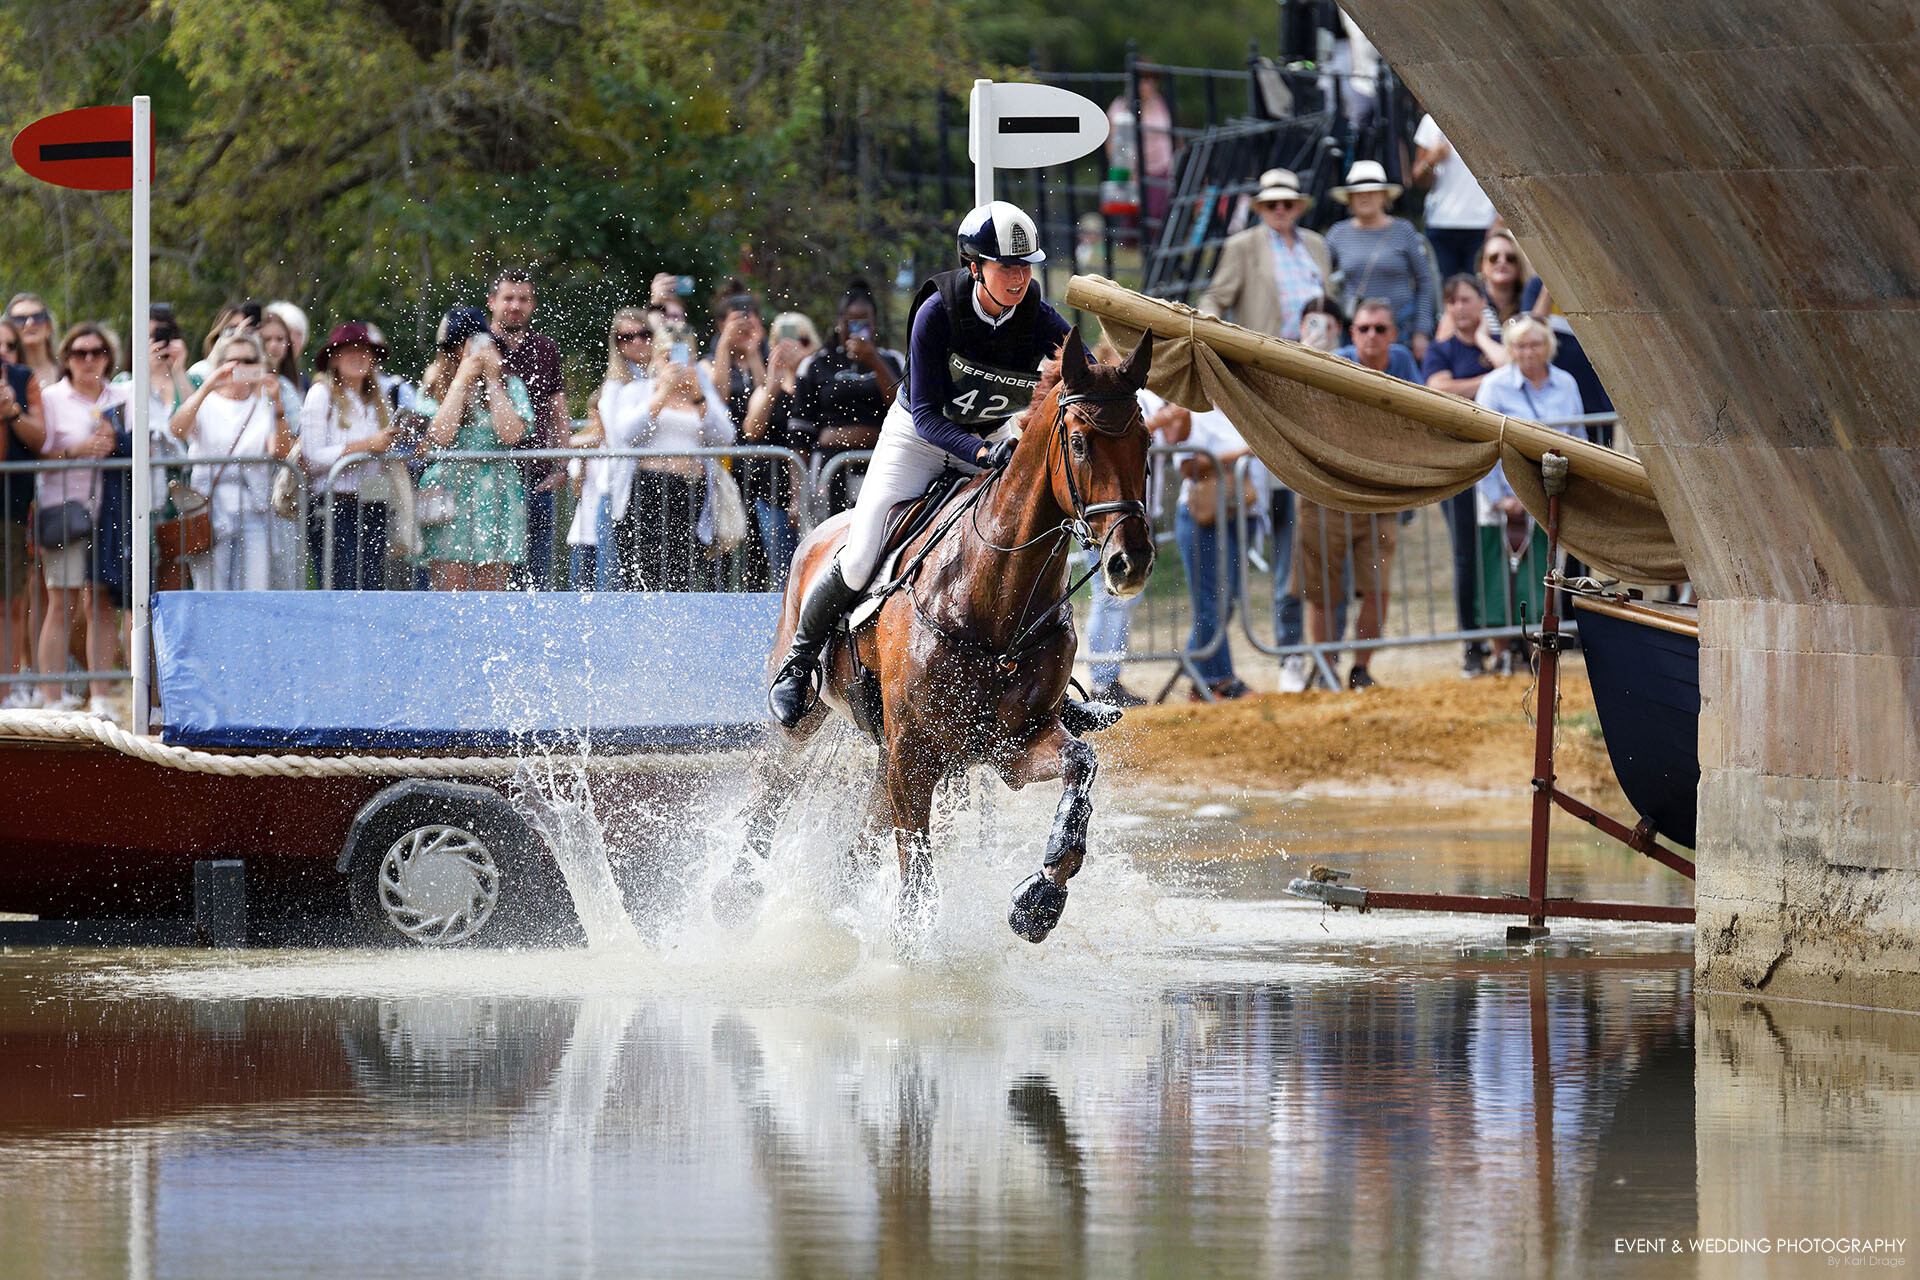 Hollie Swain & Solo land in the water at Lion Bridge, Burghley, during the 2022 Burghley Horse Trials